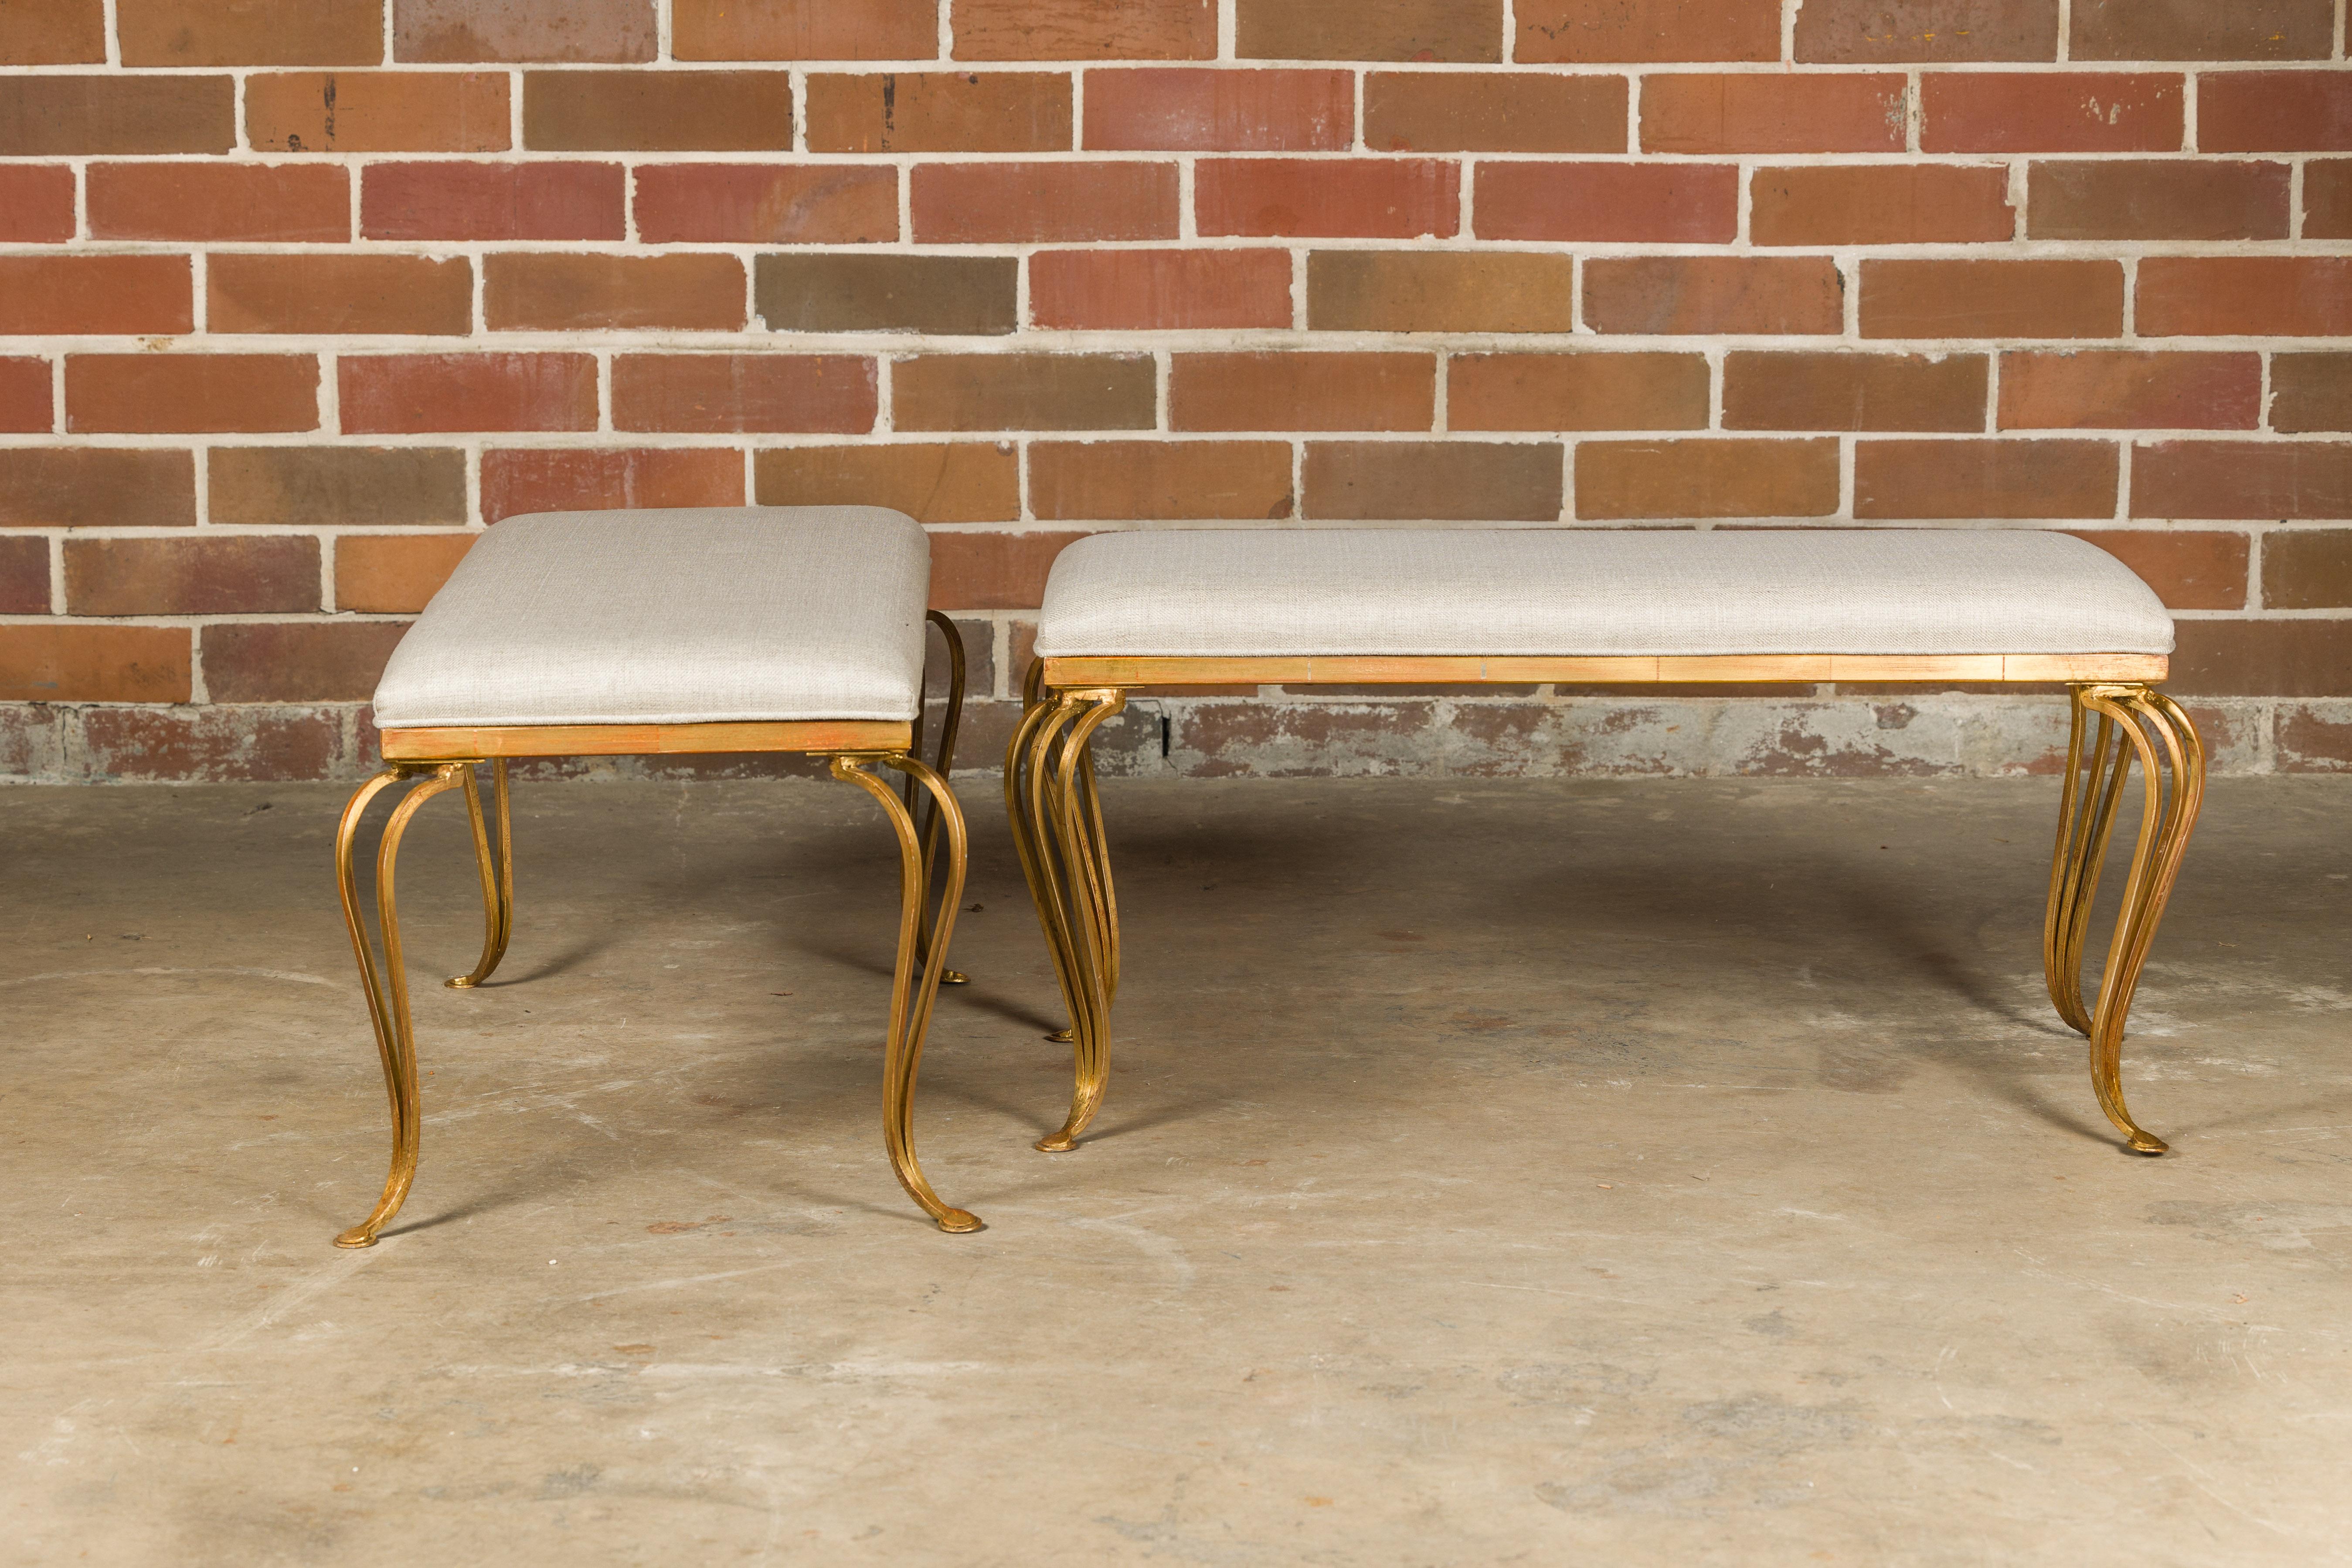 20th Century Midcentury French Gilt Metal Benches with Cabriole Legs and Upholstery, a Pair For Sale